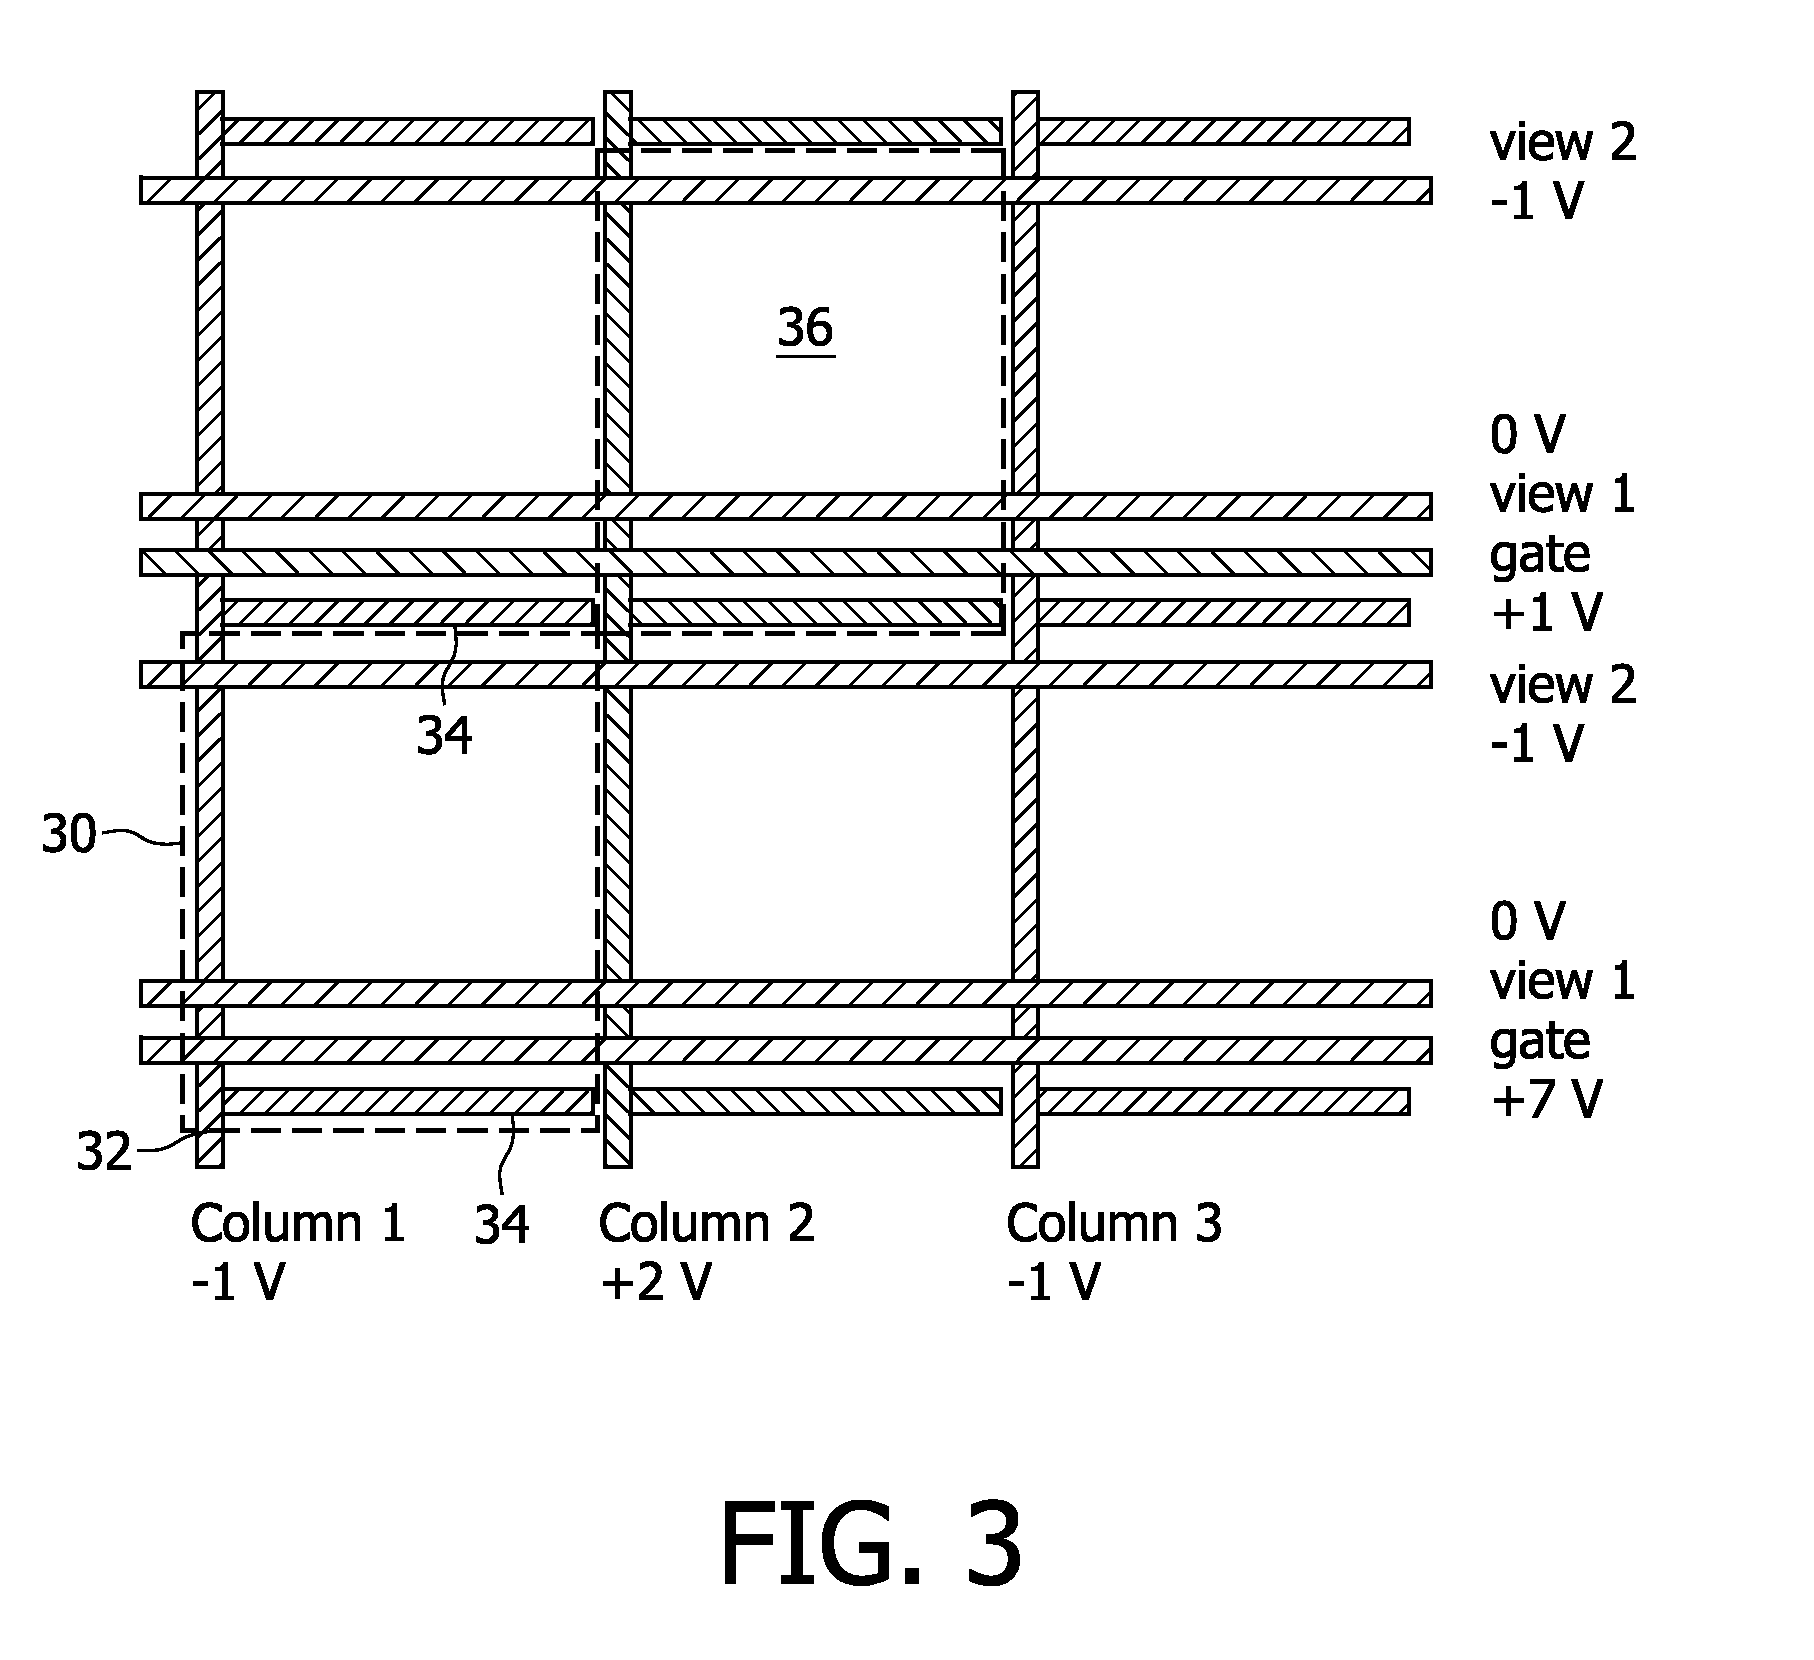 Electronic device using movement of particles